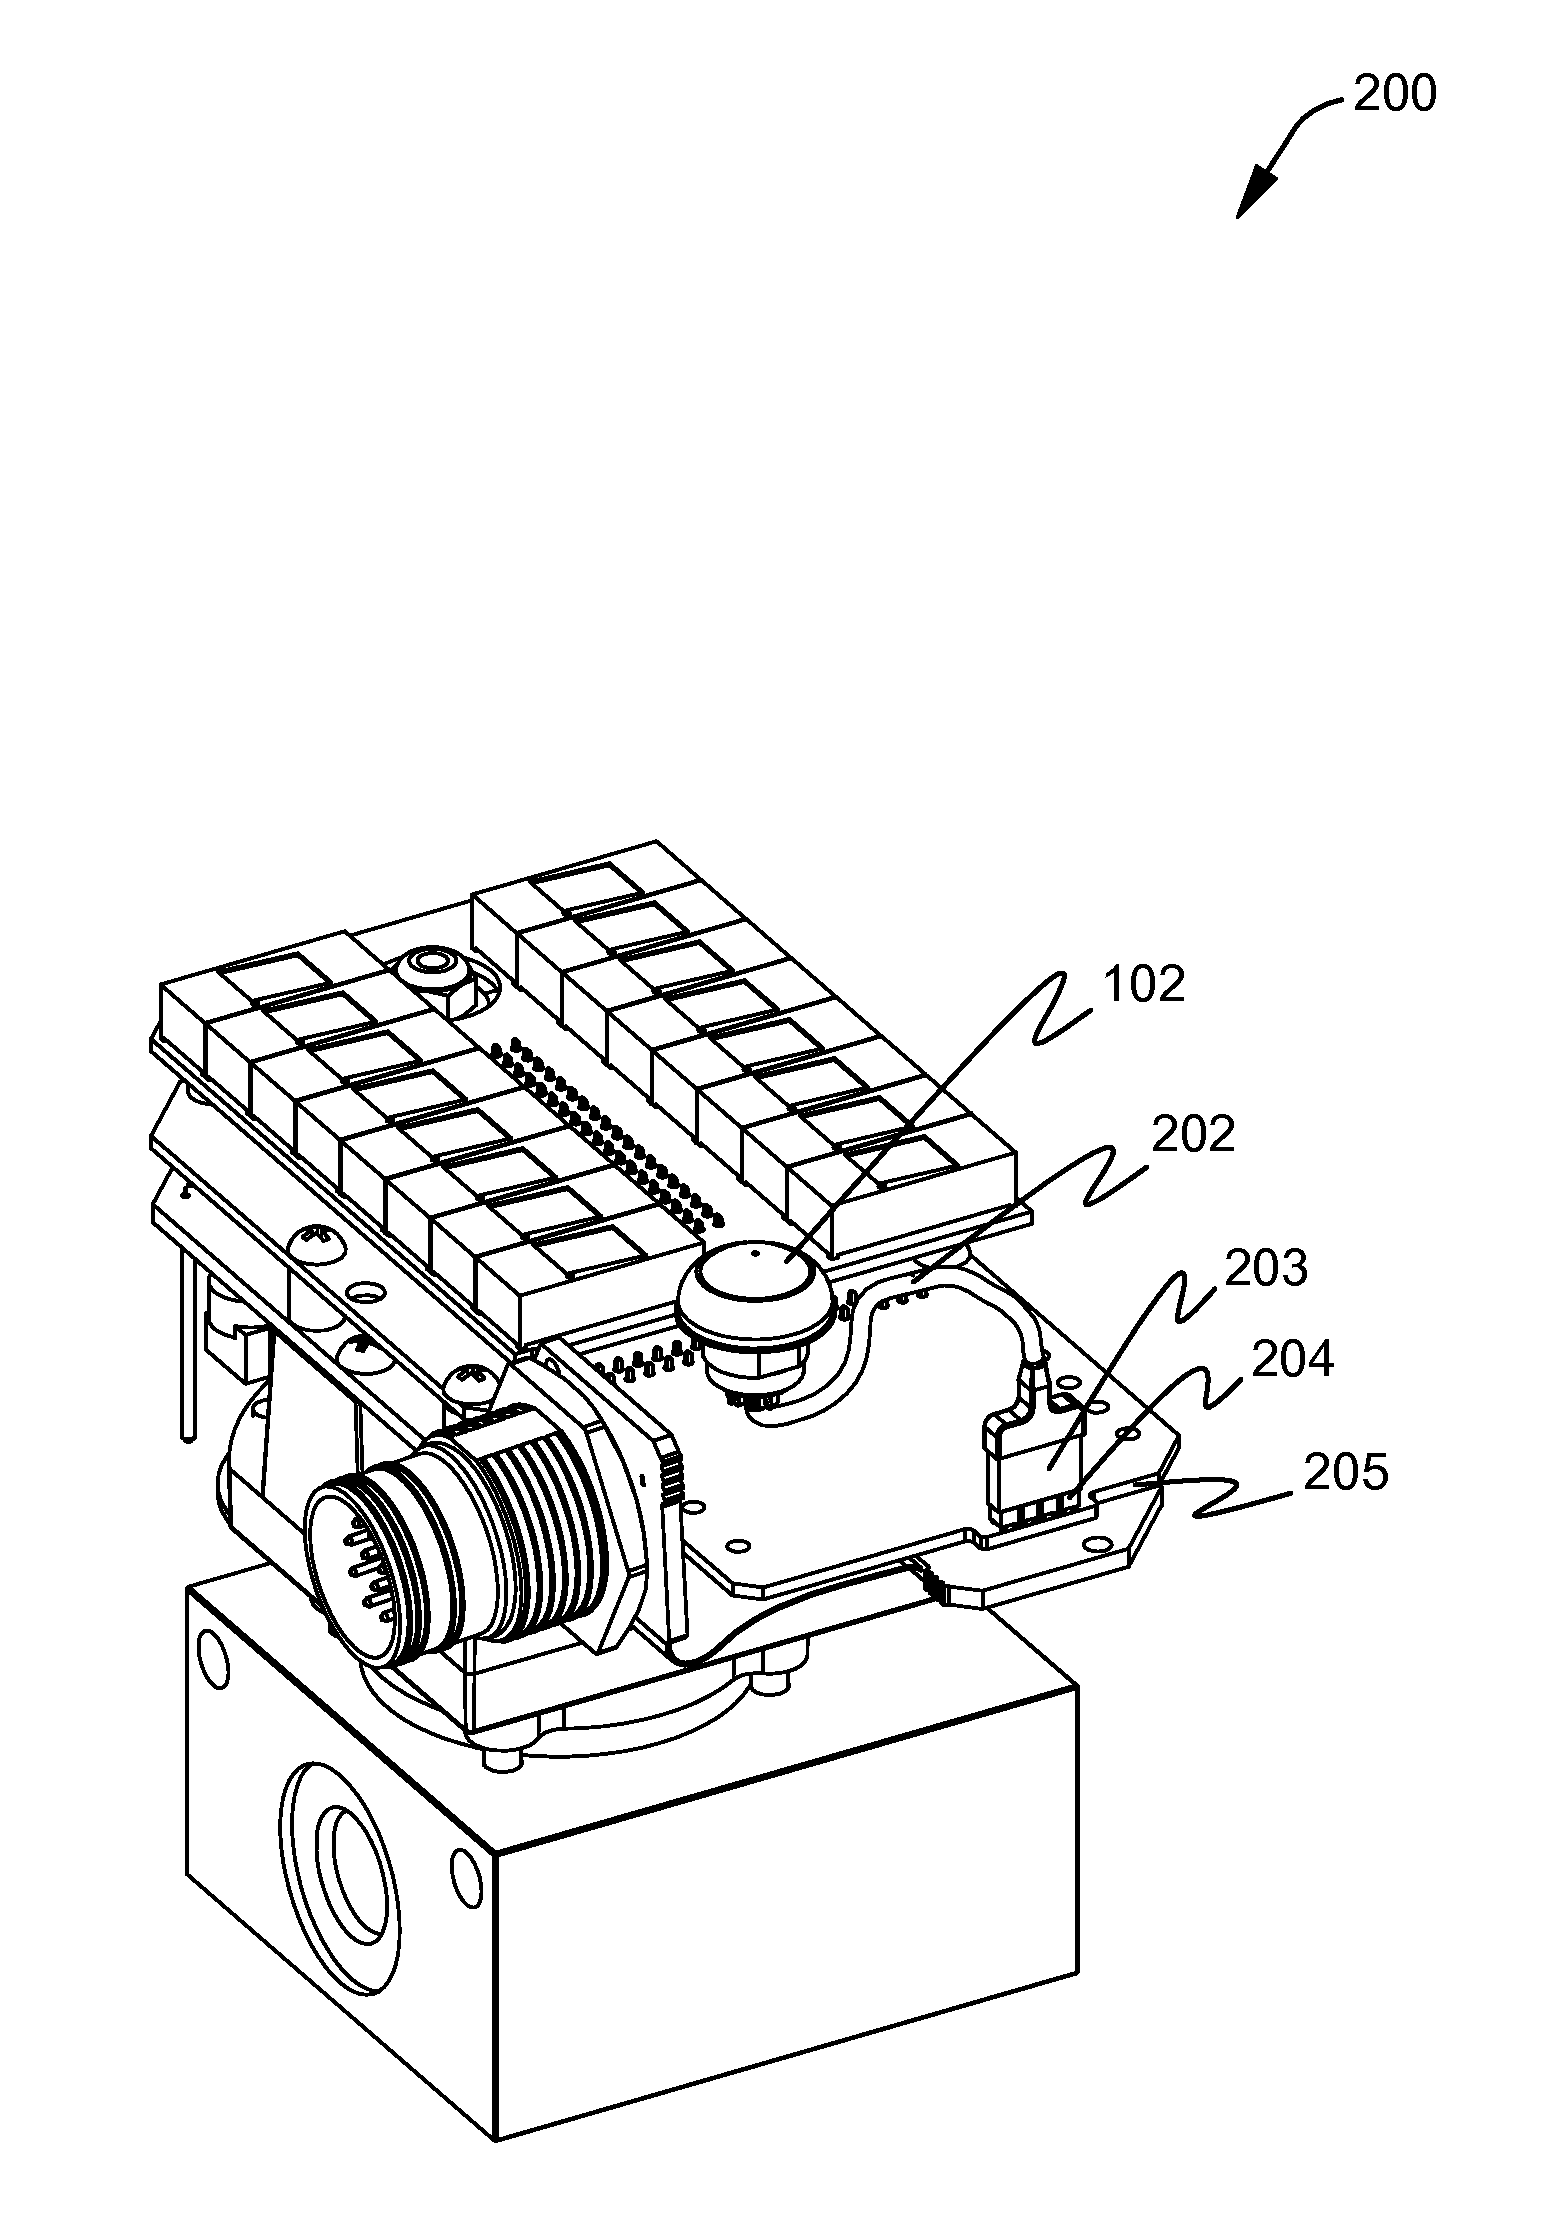 Network manageable advanced gas sensor apparatus and method